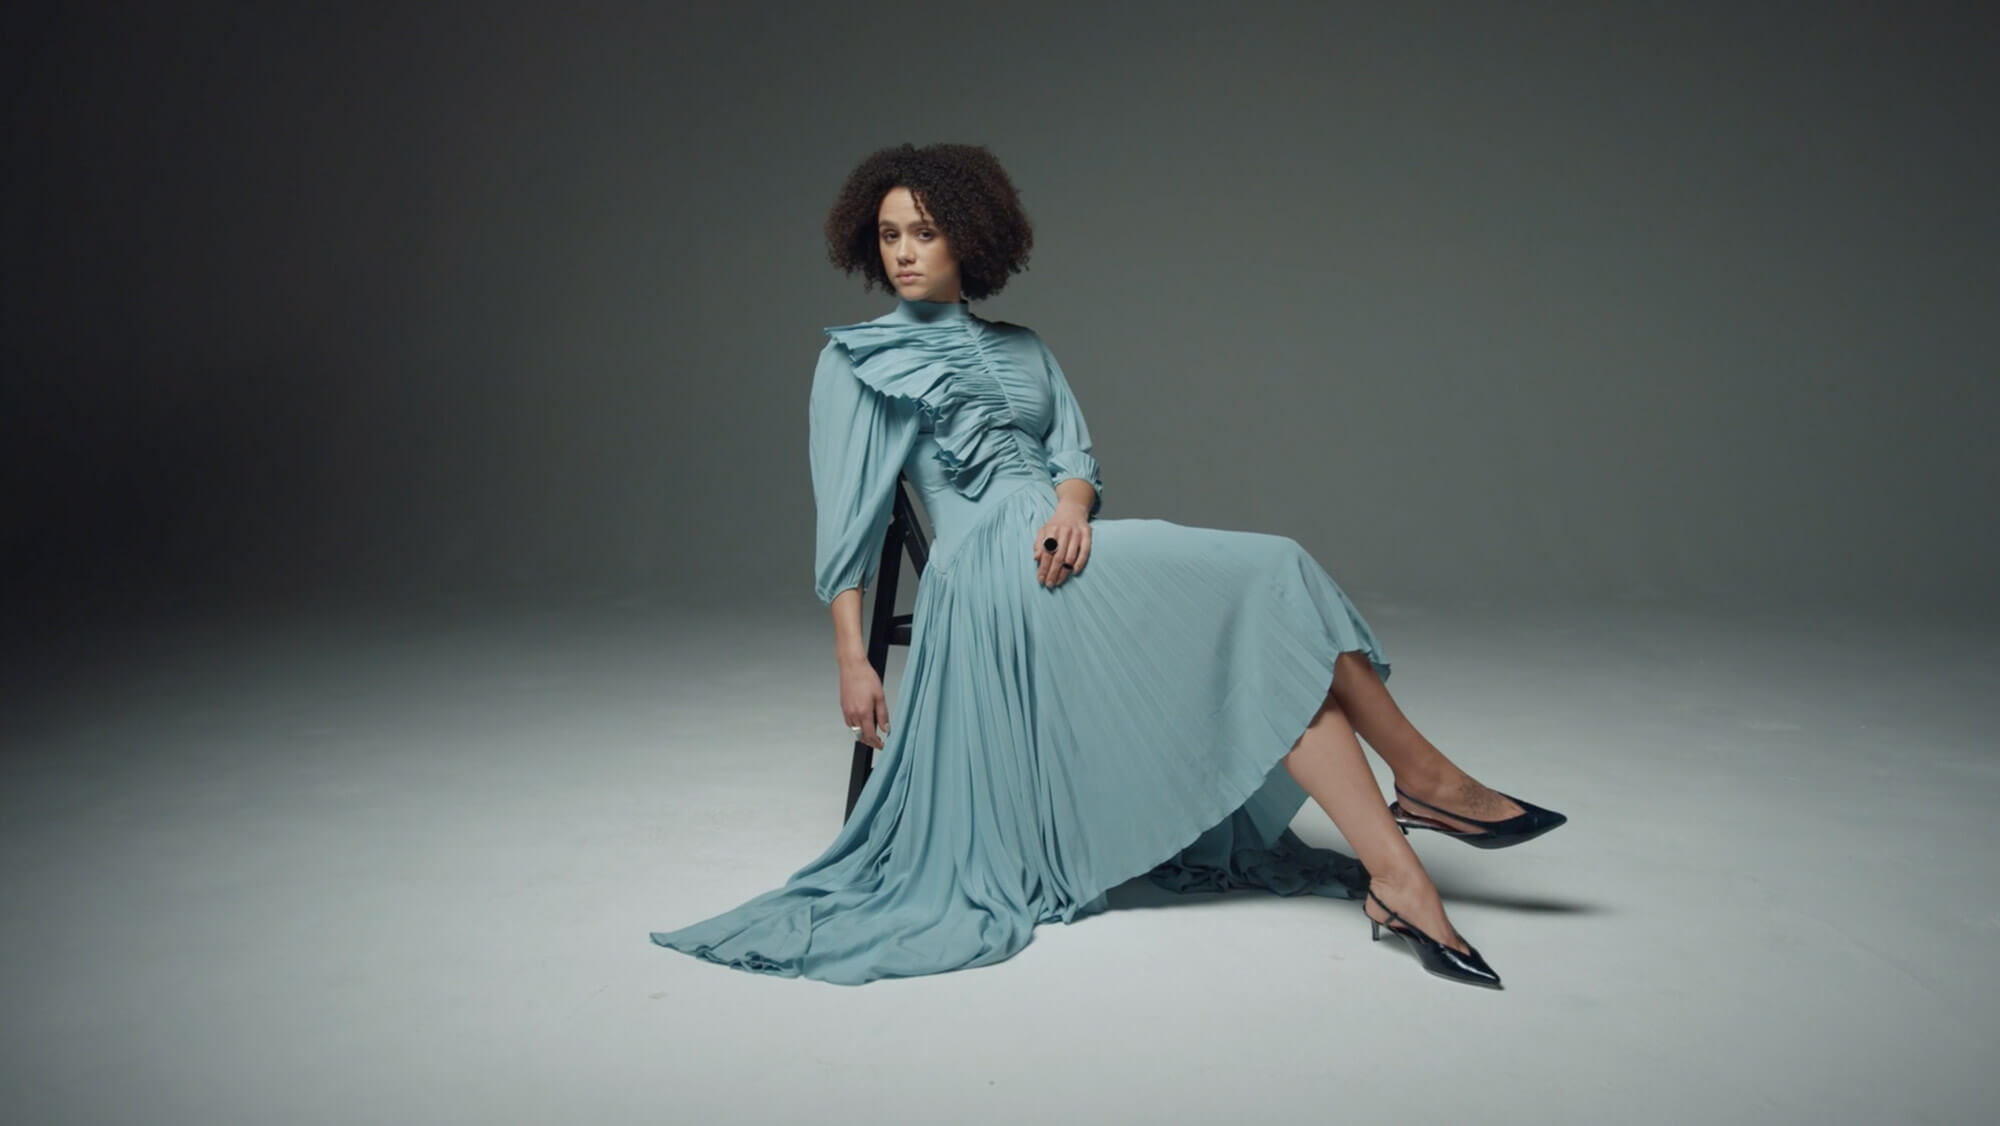 Nathalie Emmanuel sitting on a chair wearing a long blue dress in the Harper's Bazaar film shoot, from the Rise Media case studies archive